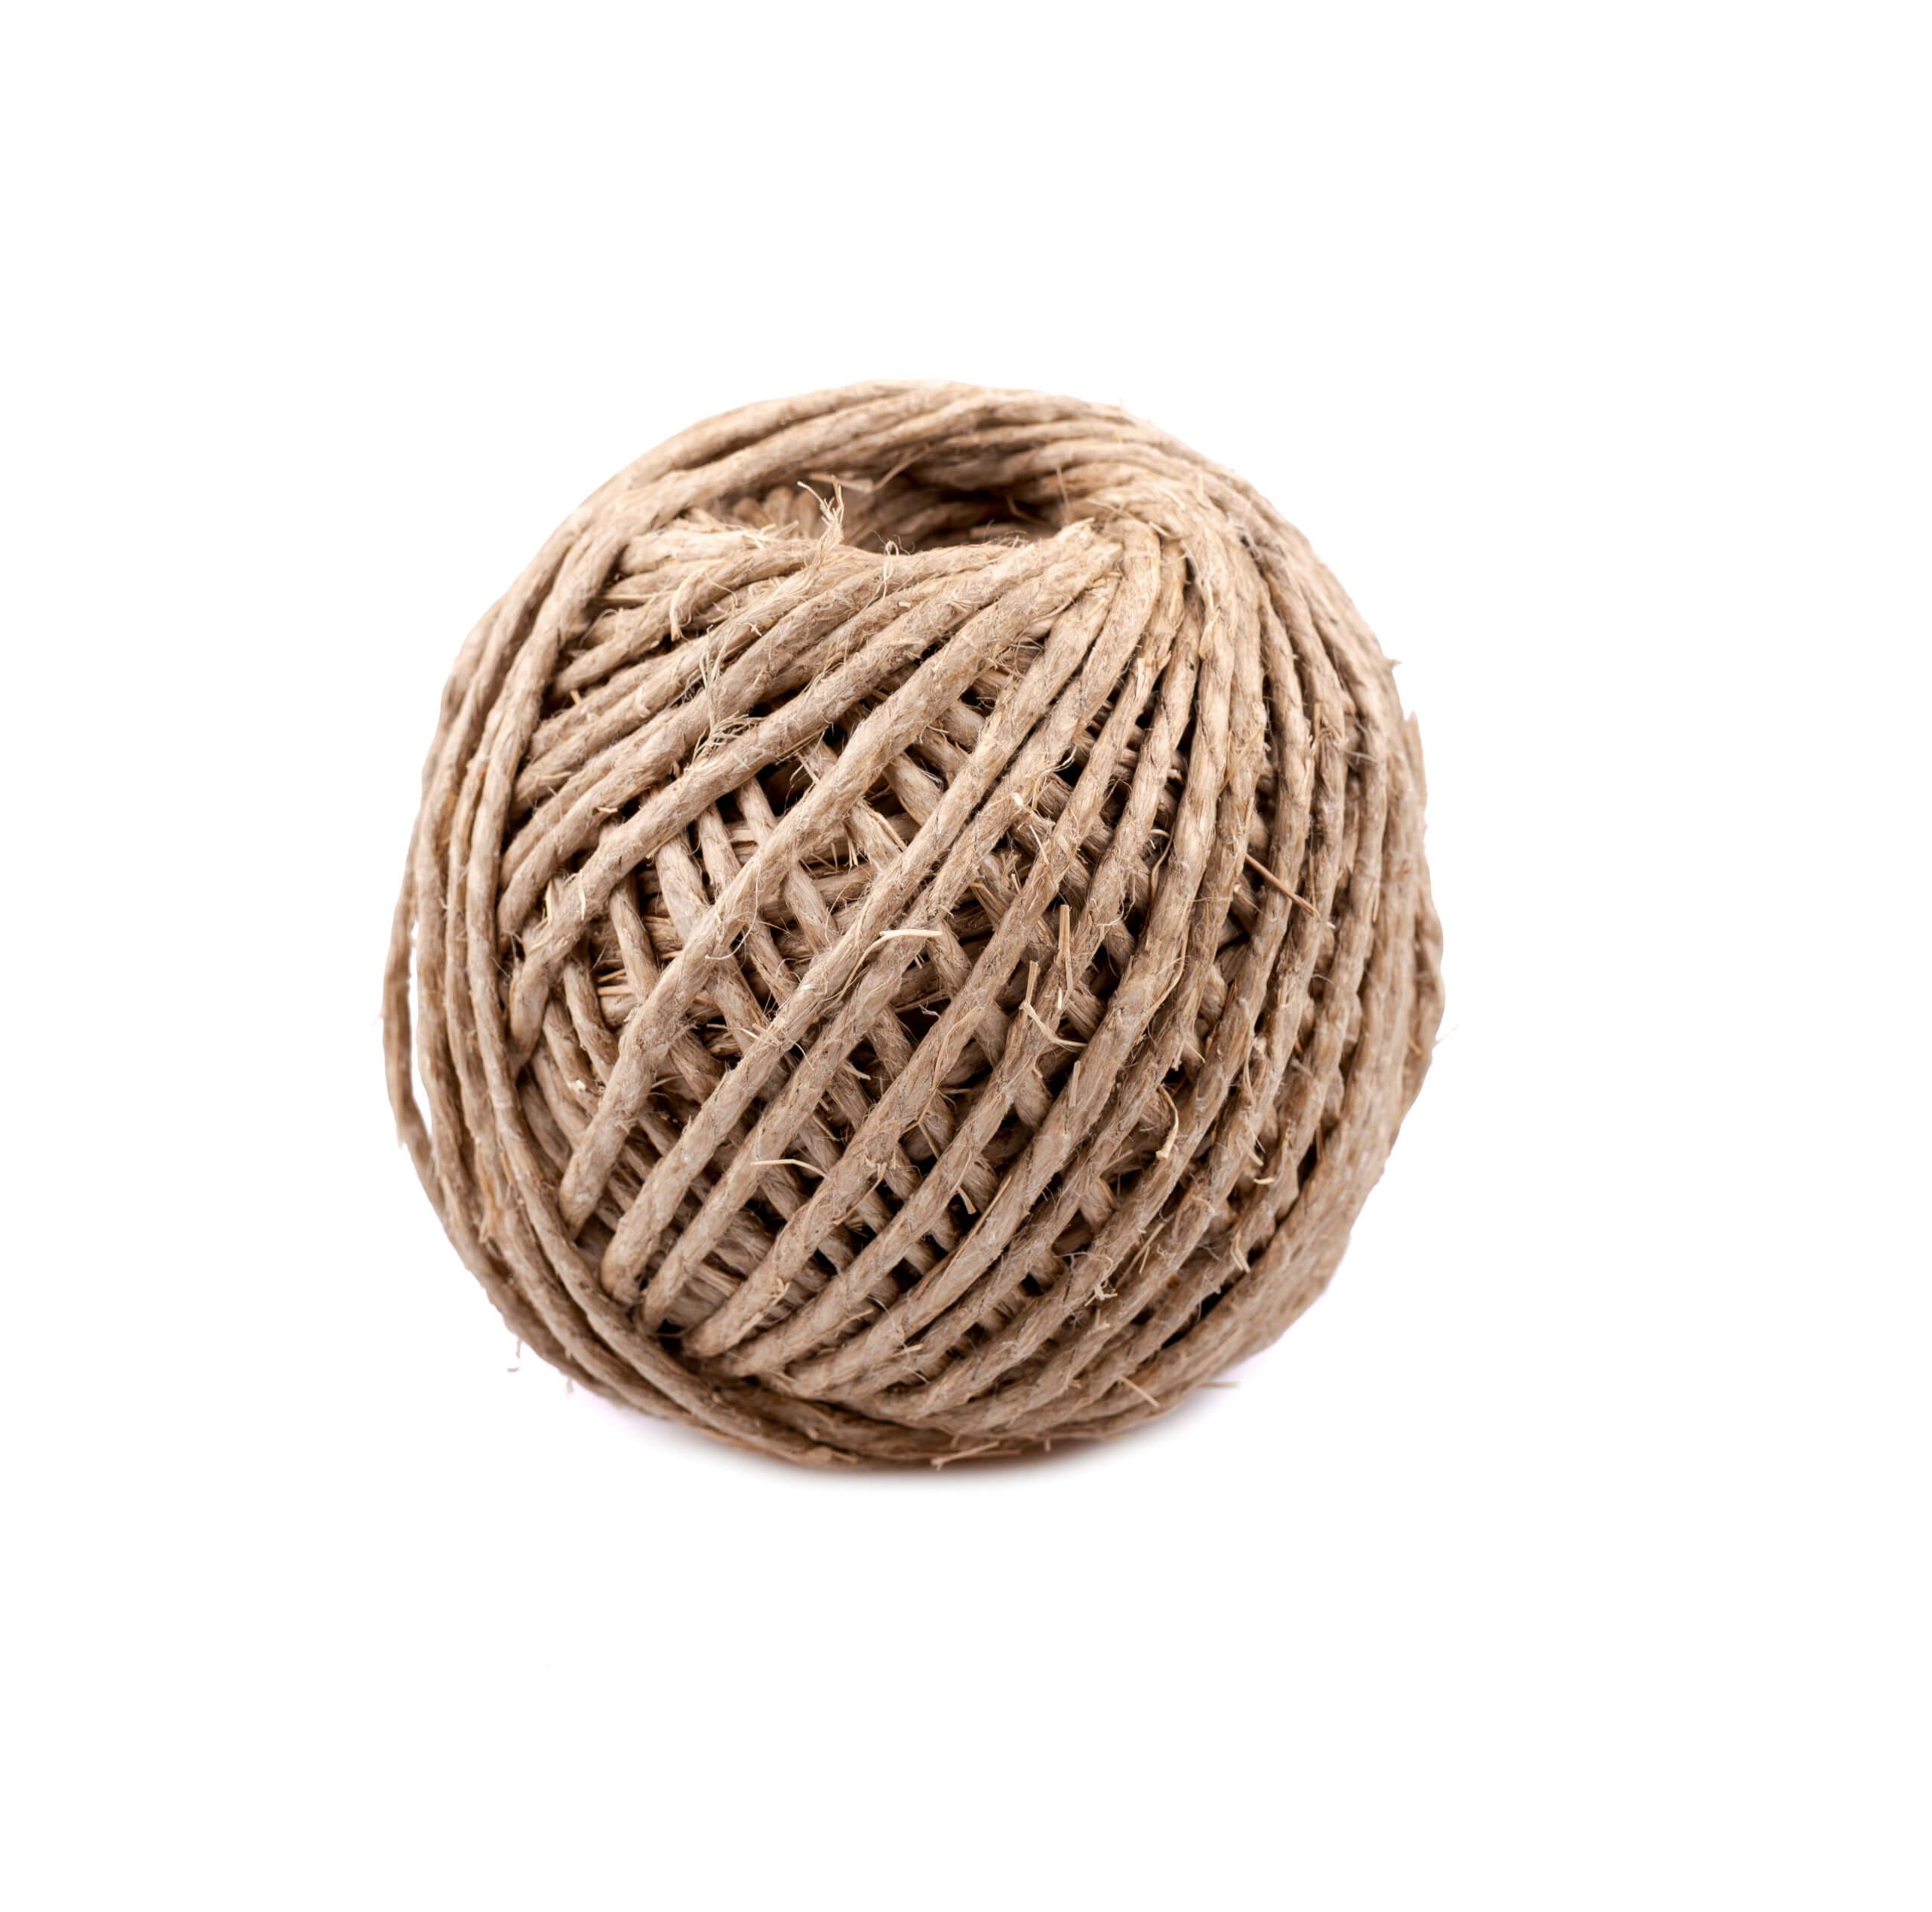 An image of our Twine and String.